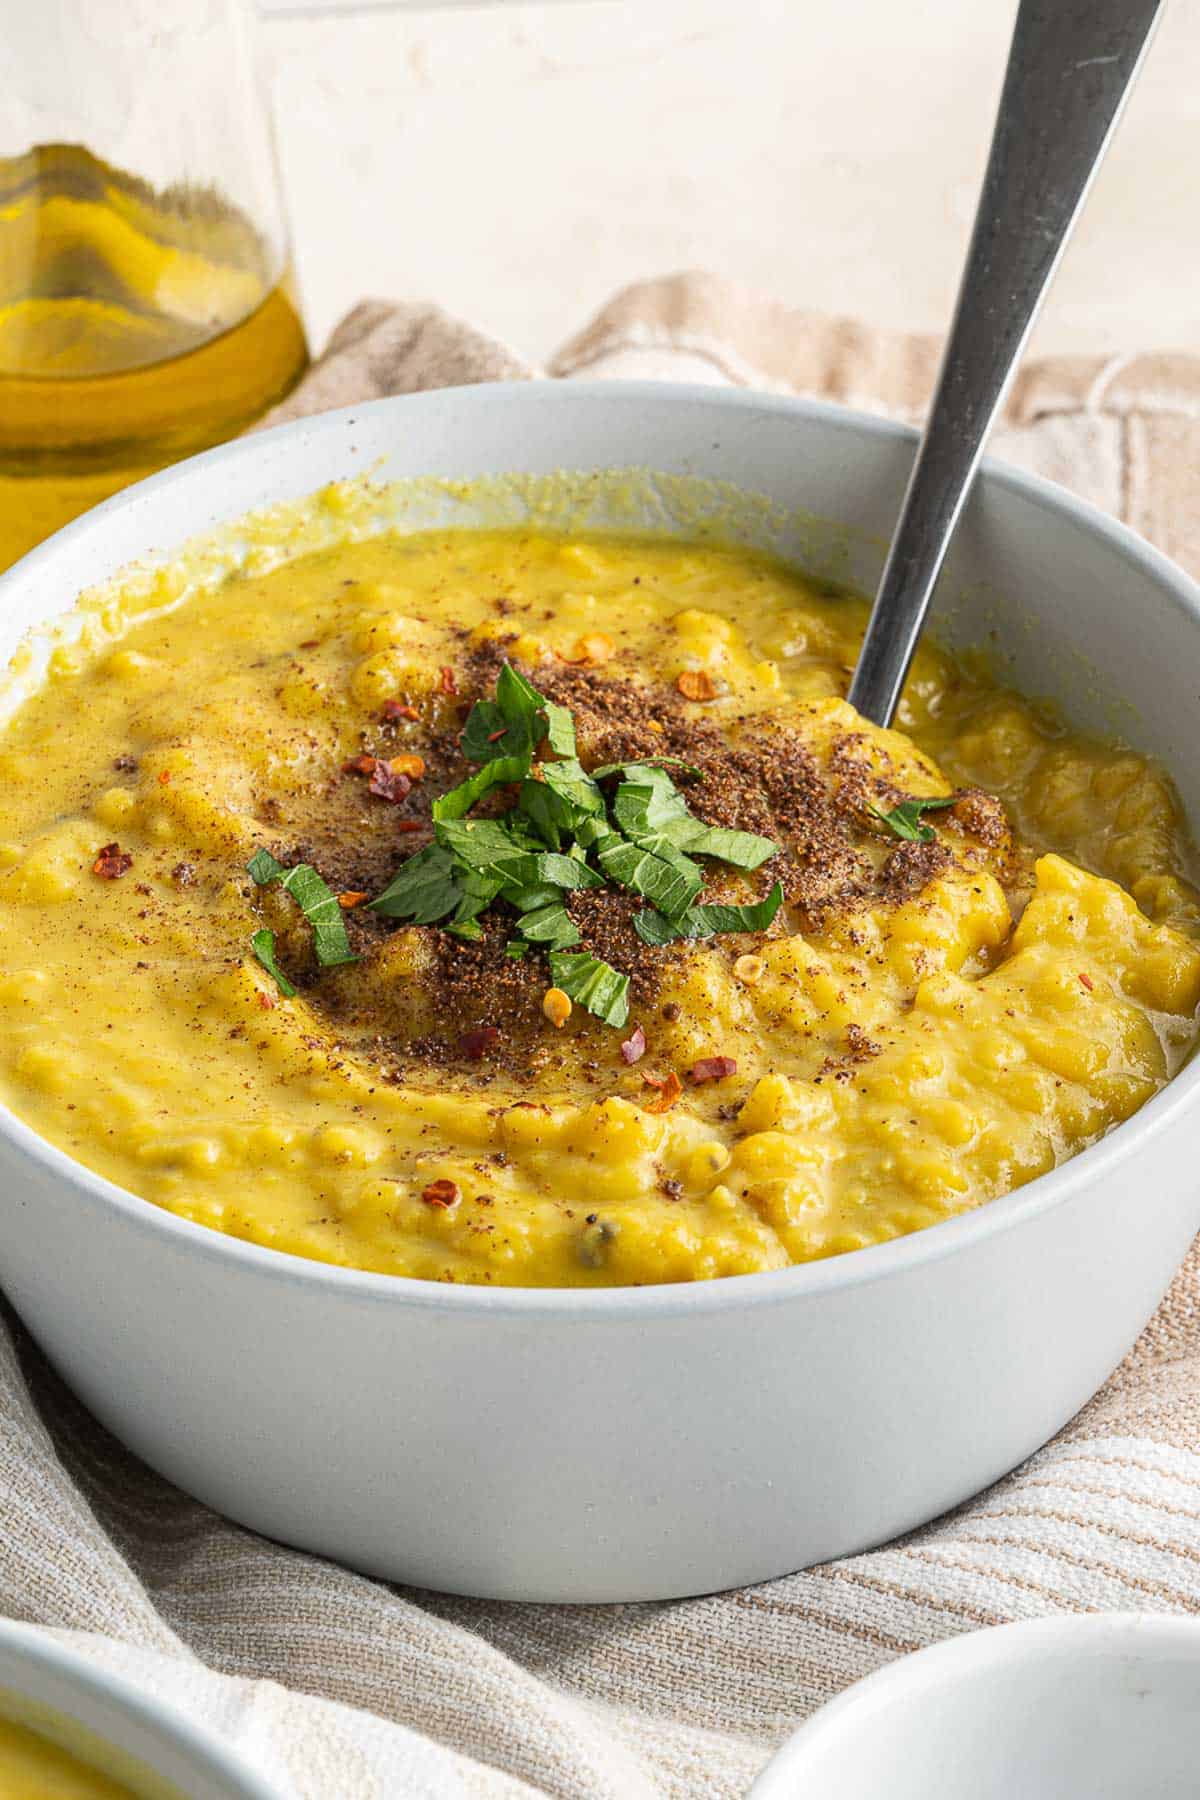 Yellow lentil soup in a bowl with spices and garnish